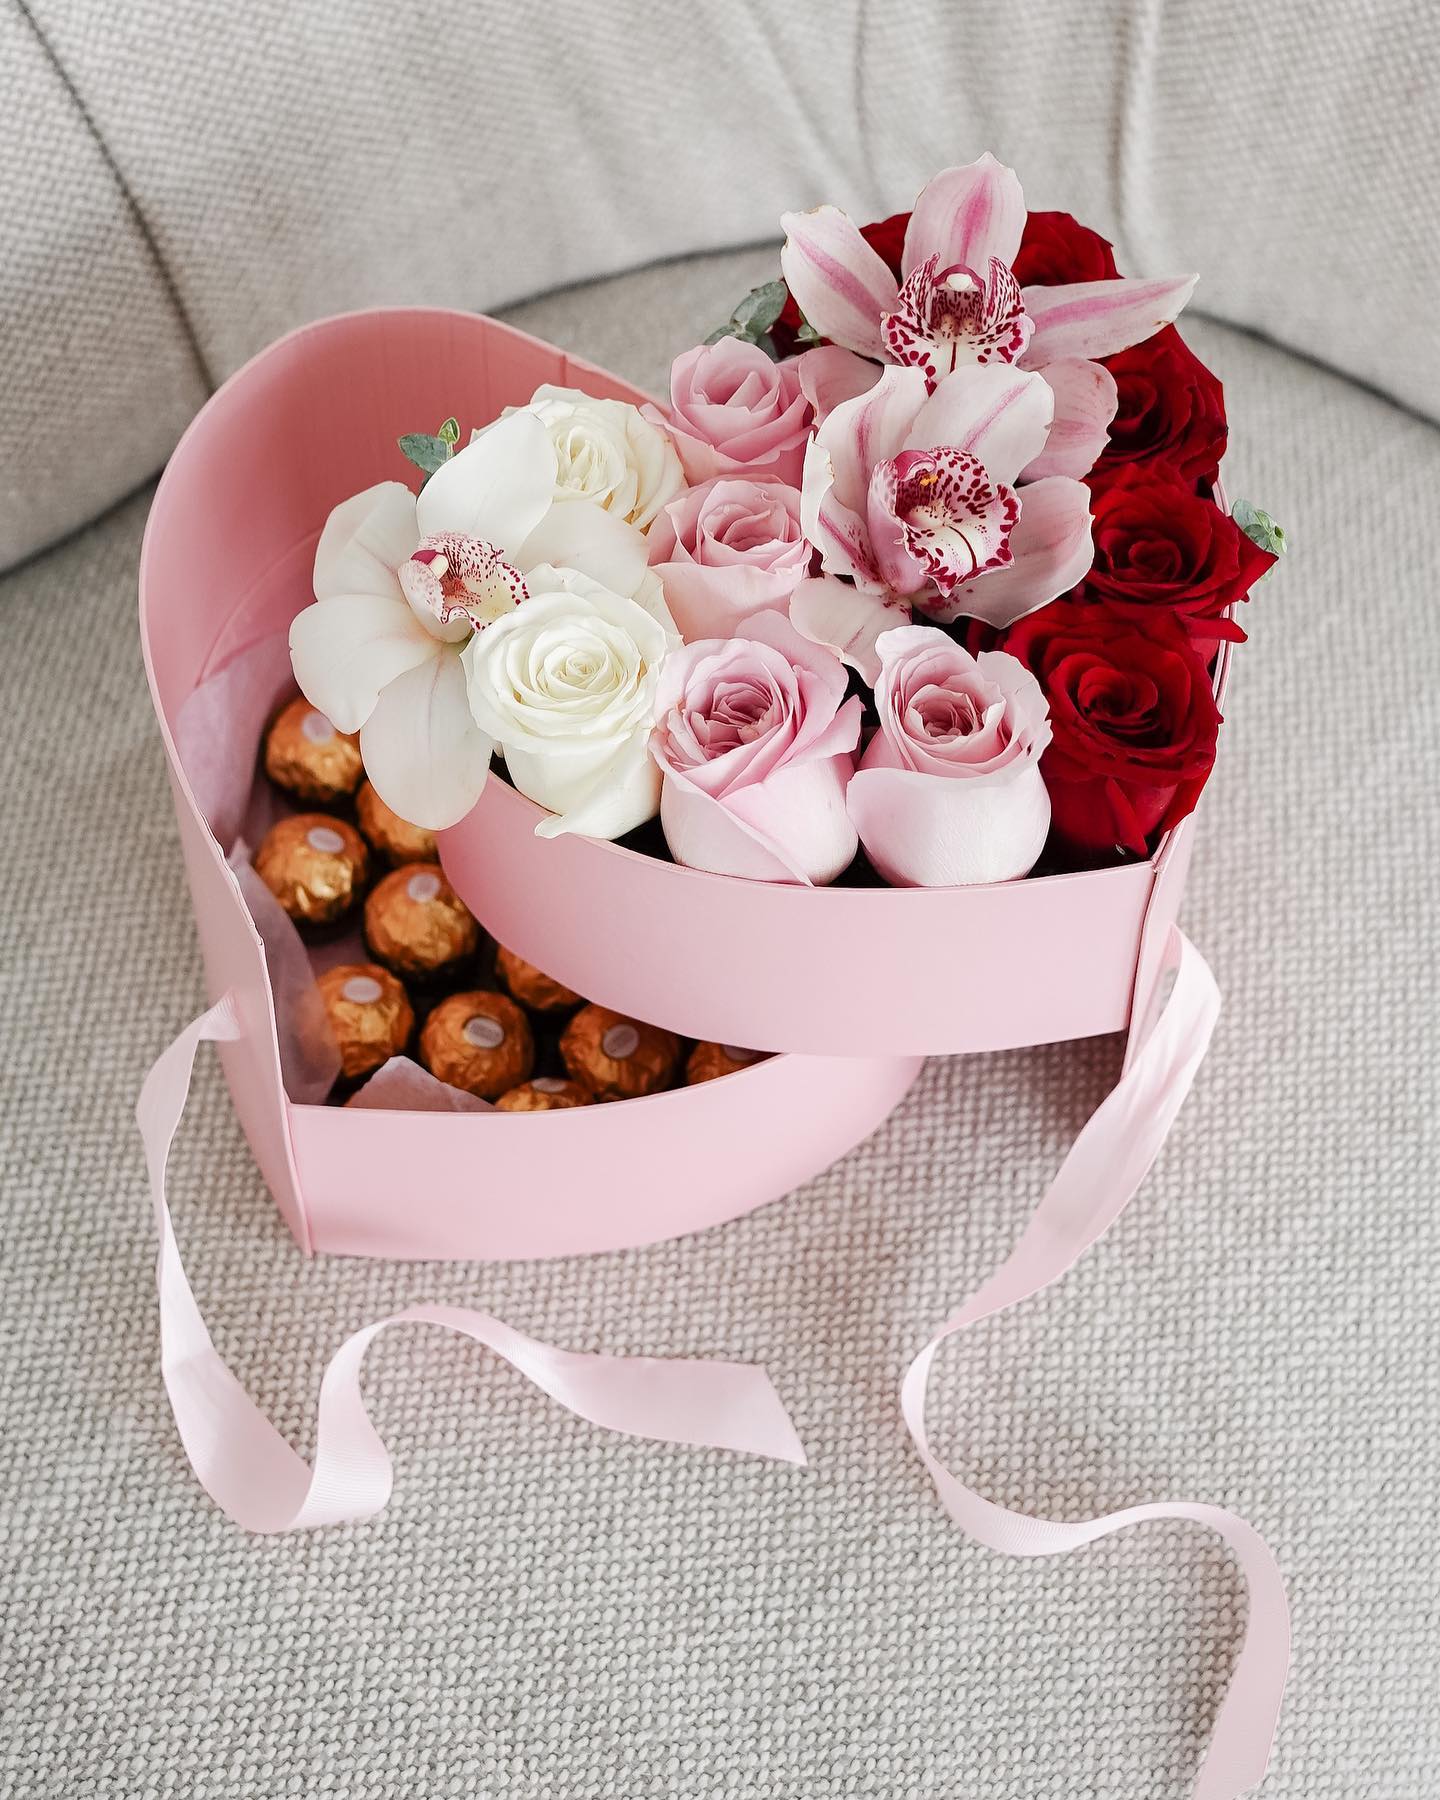 Light pink and red roses in a heart shaped box from Blossom Moments.